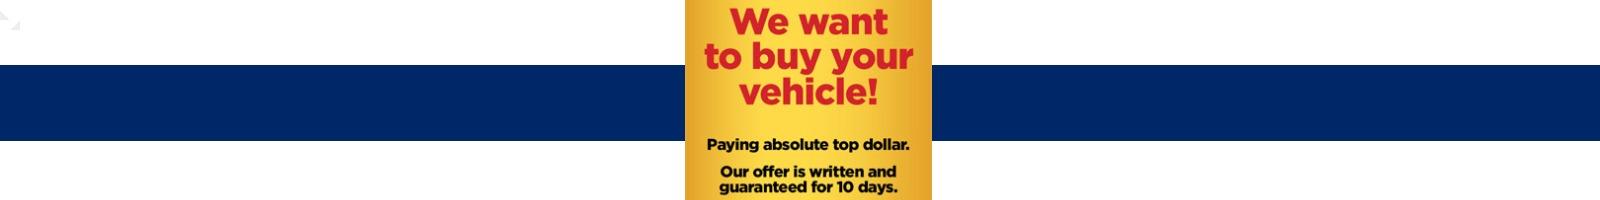 We want to buy your vehicle